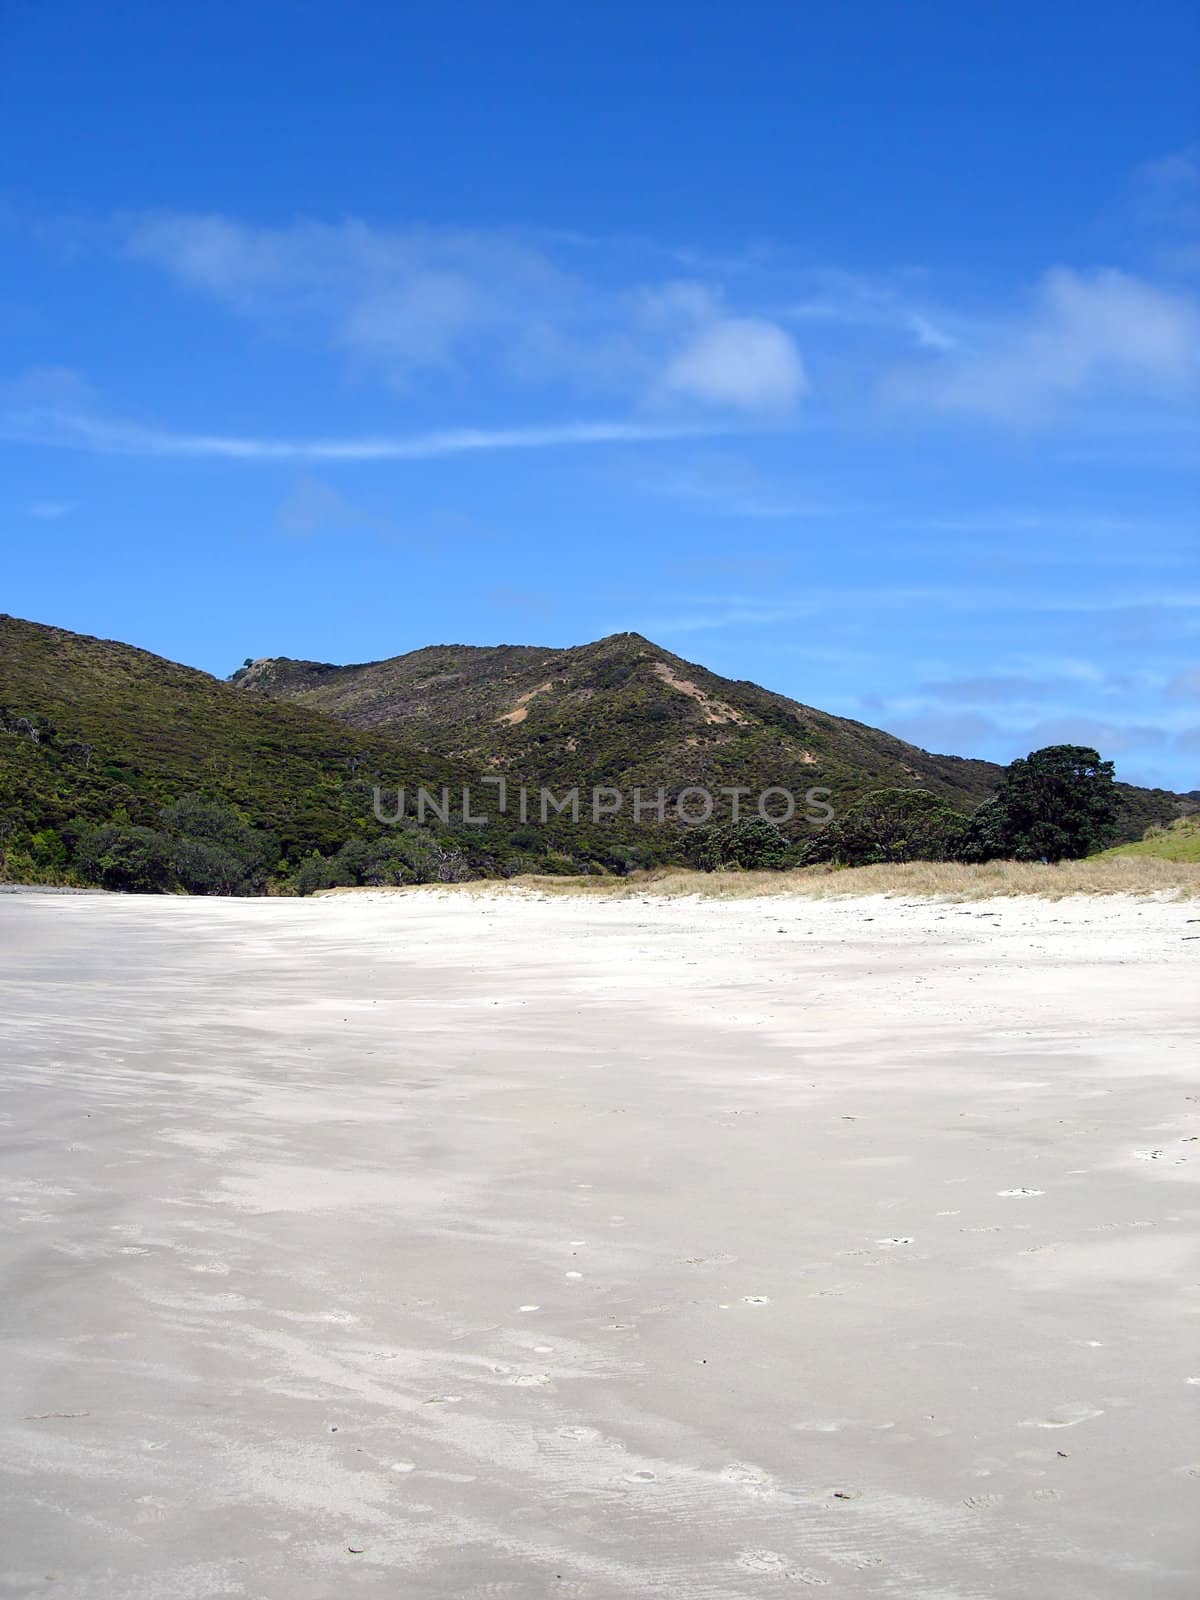 Looking inland from Tapotupotu Bay Beach, New Zealand